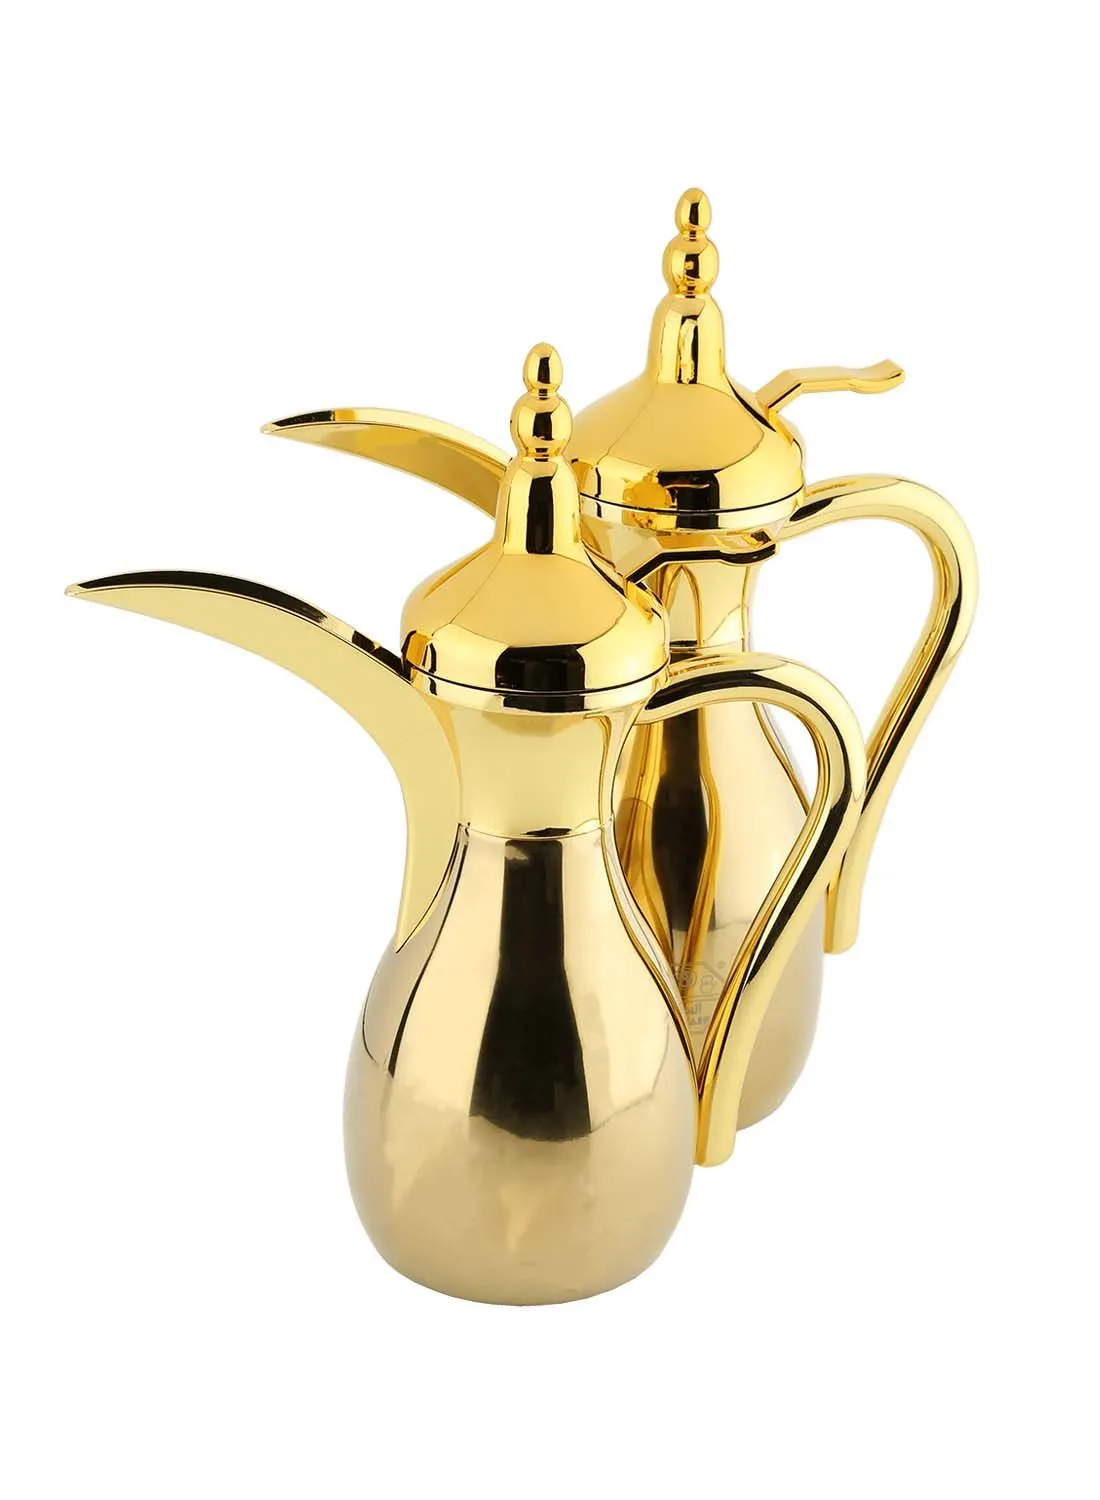 Alsaif 2-Piece Stainless Steel Arabic Coffee Dallah Set Gold 